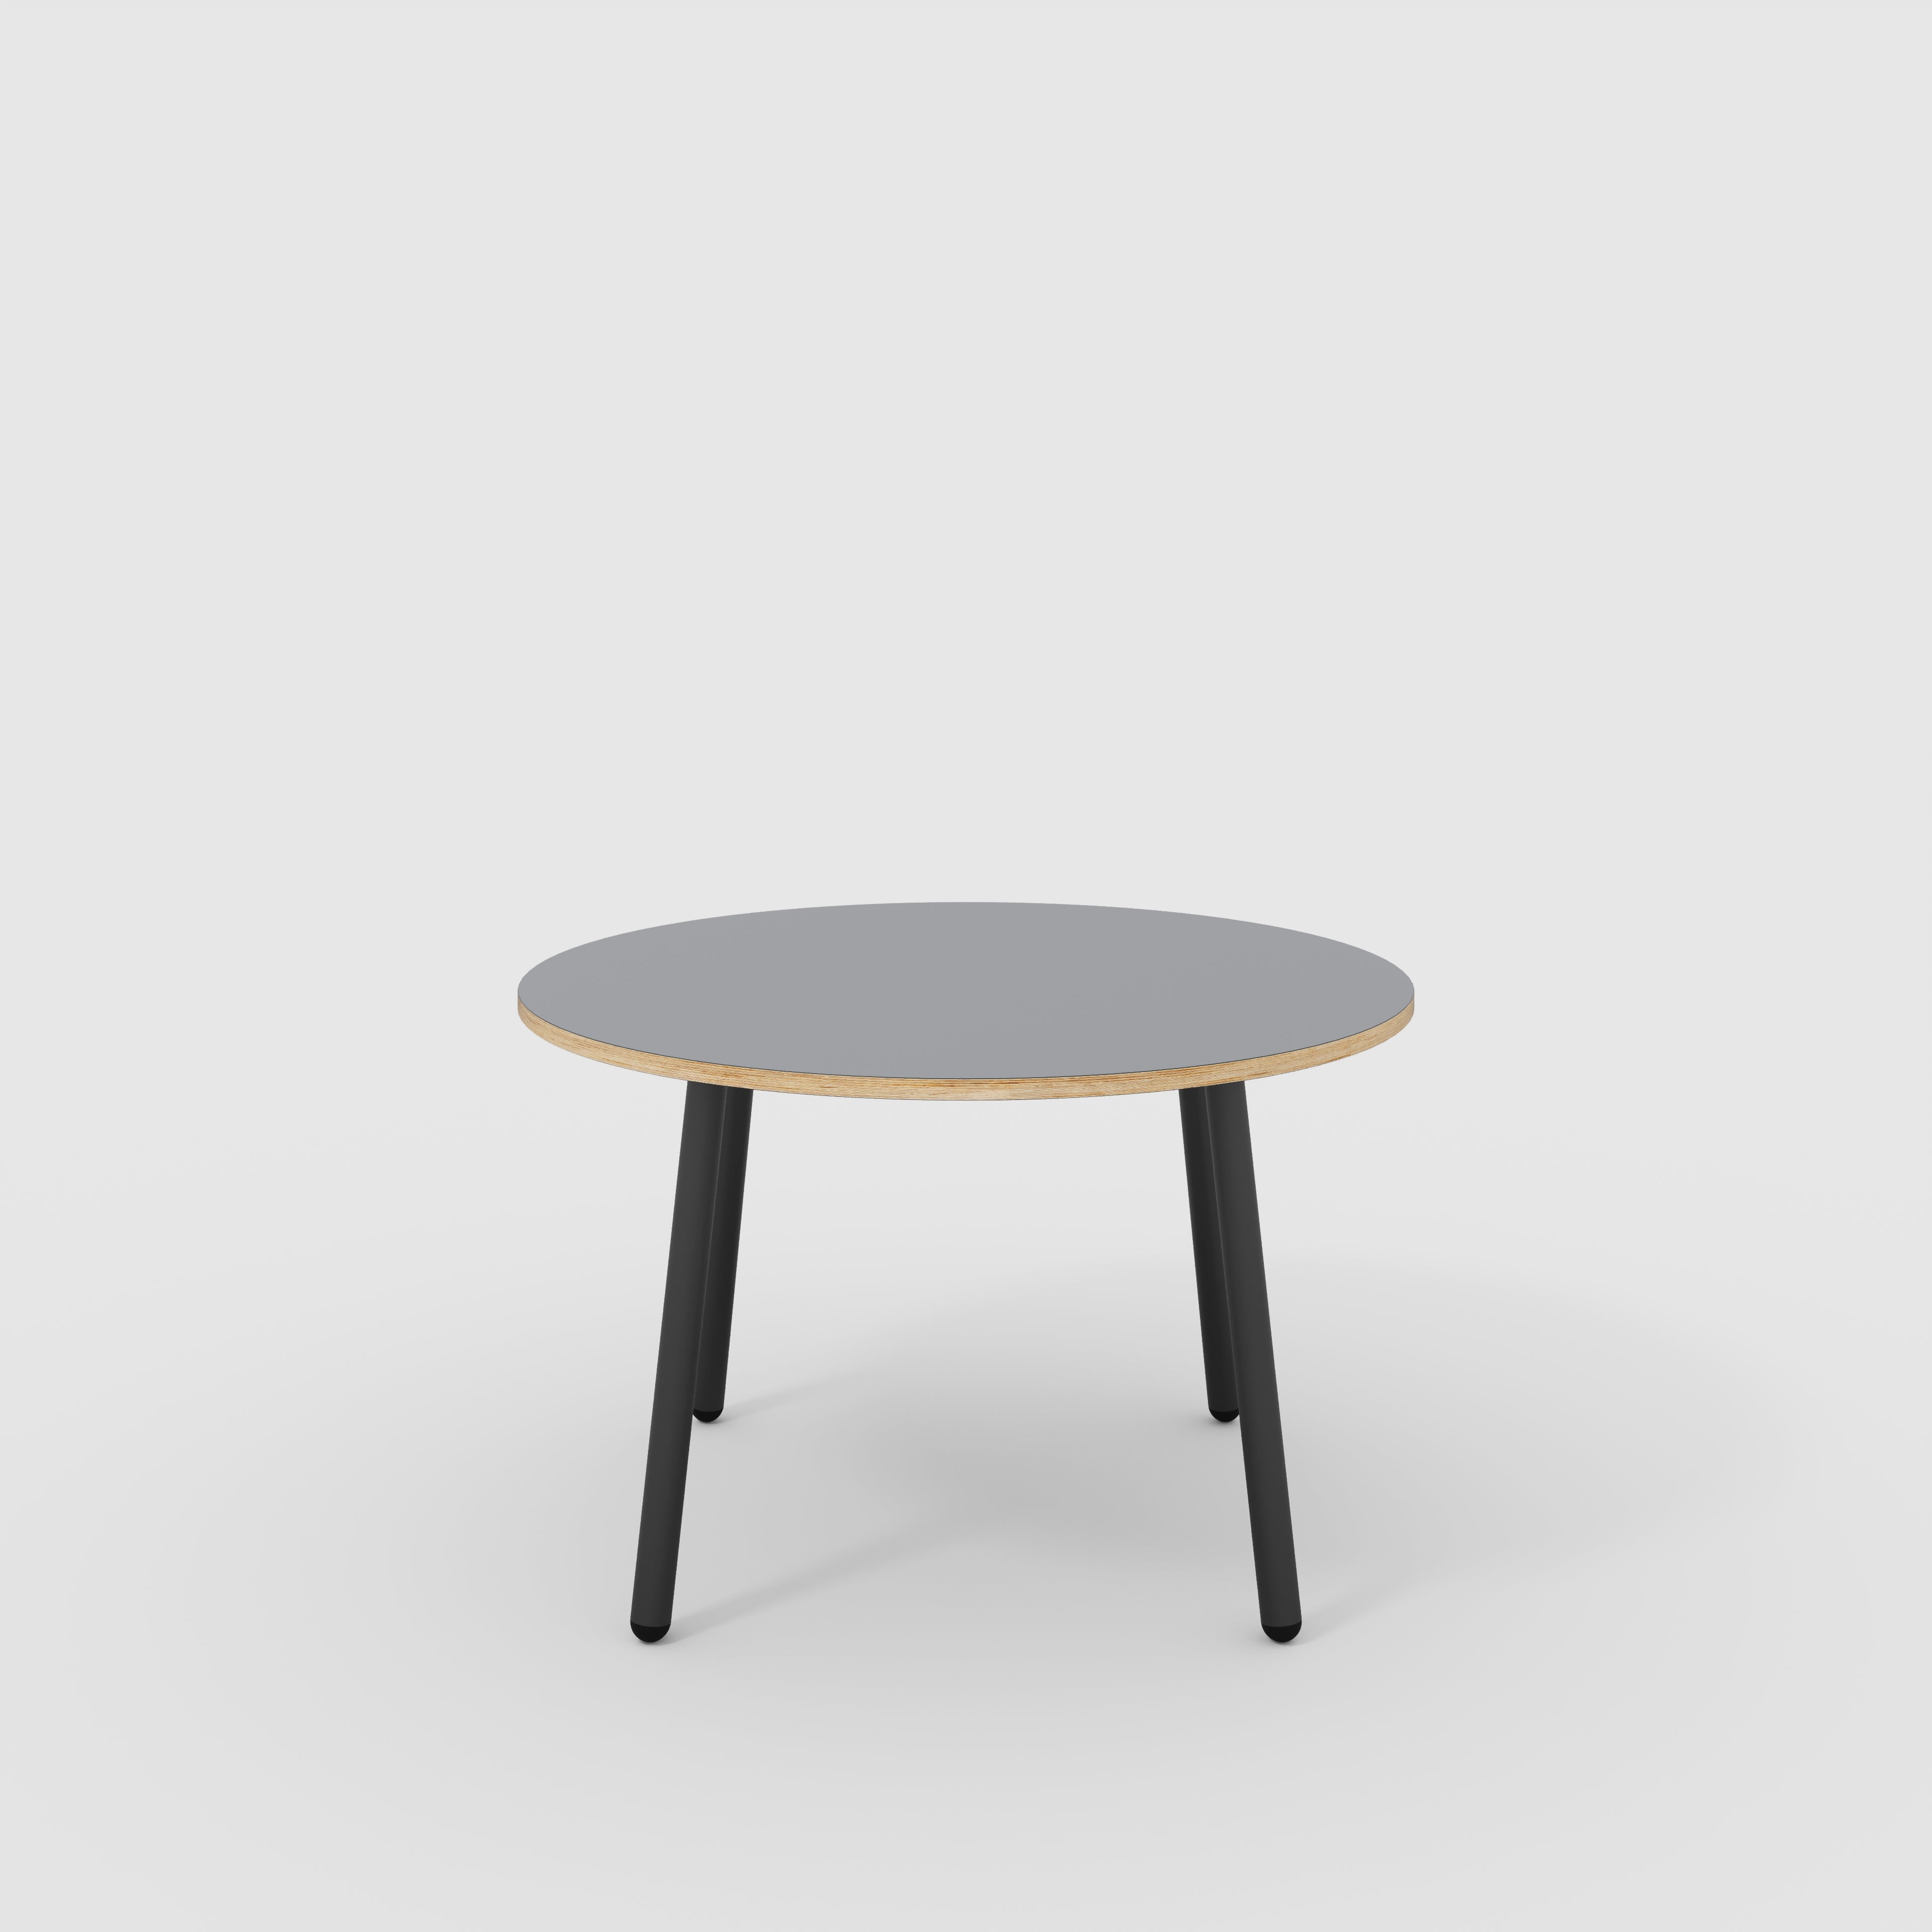 Round Table with Black Round Single Pin Legs - Formica Tornado Grey - 1200(dia) x 750(h)